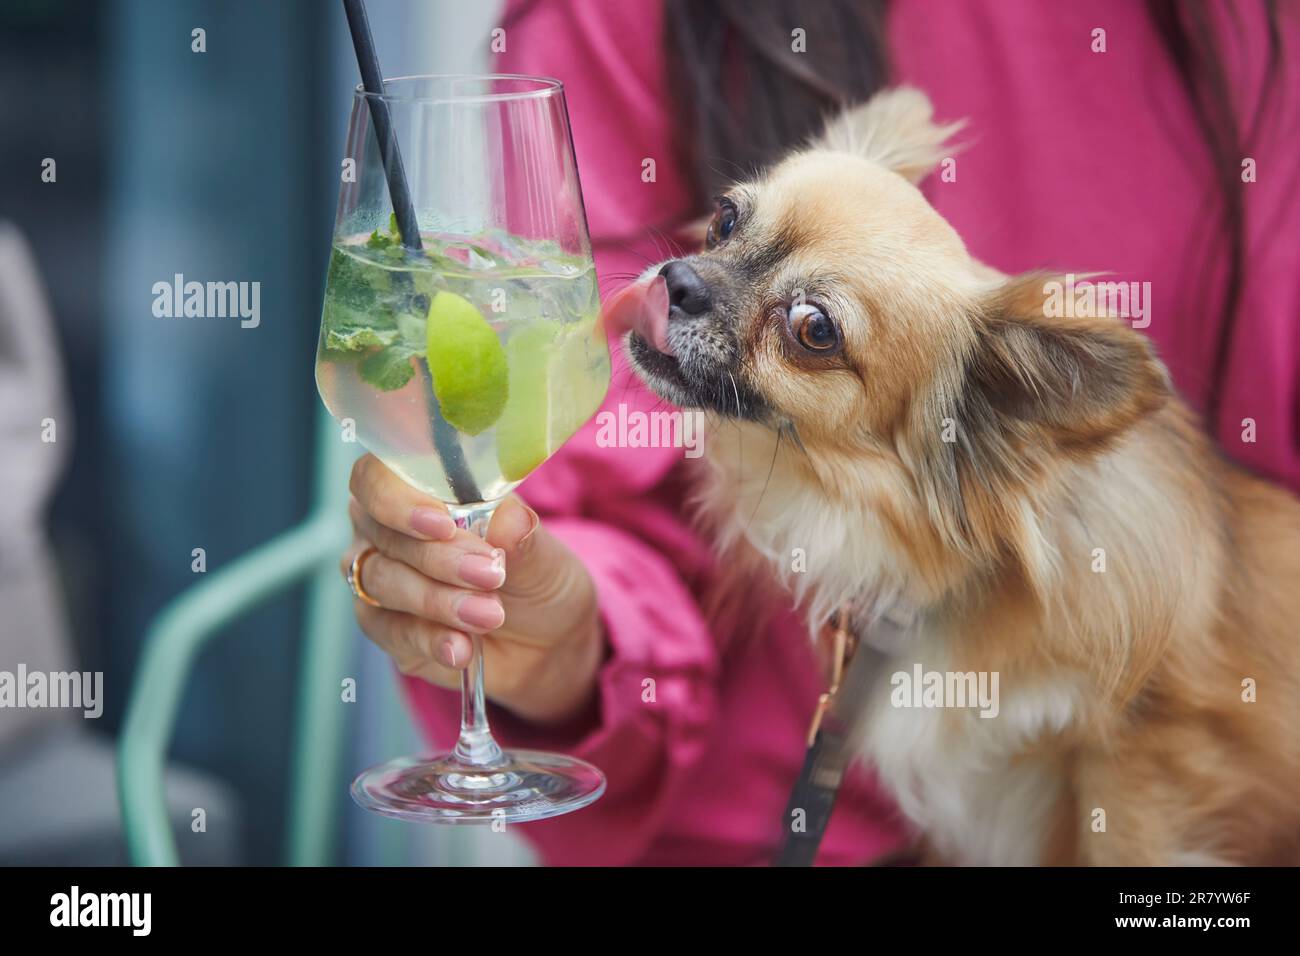 Funny chihuahua licking drinking glass with cocktail. Woman sitting in outdoor restaurant and holding lap dog in her arms. Stock Photo